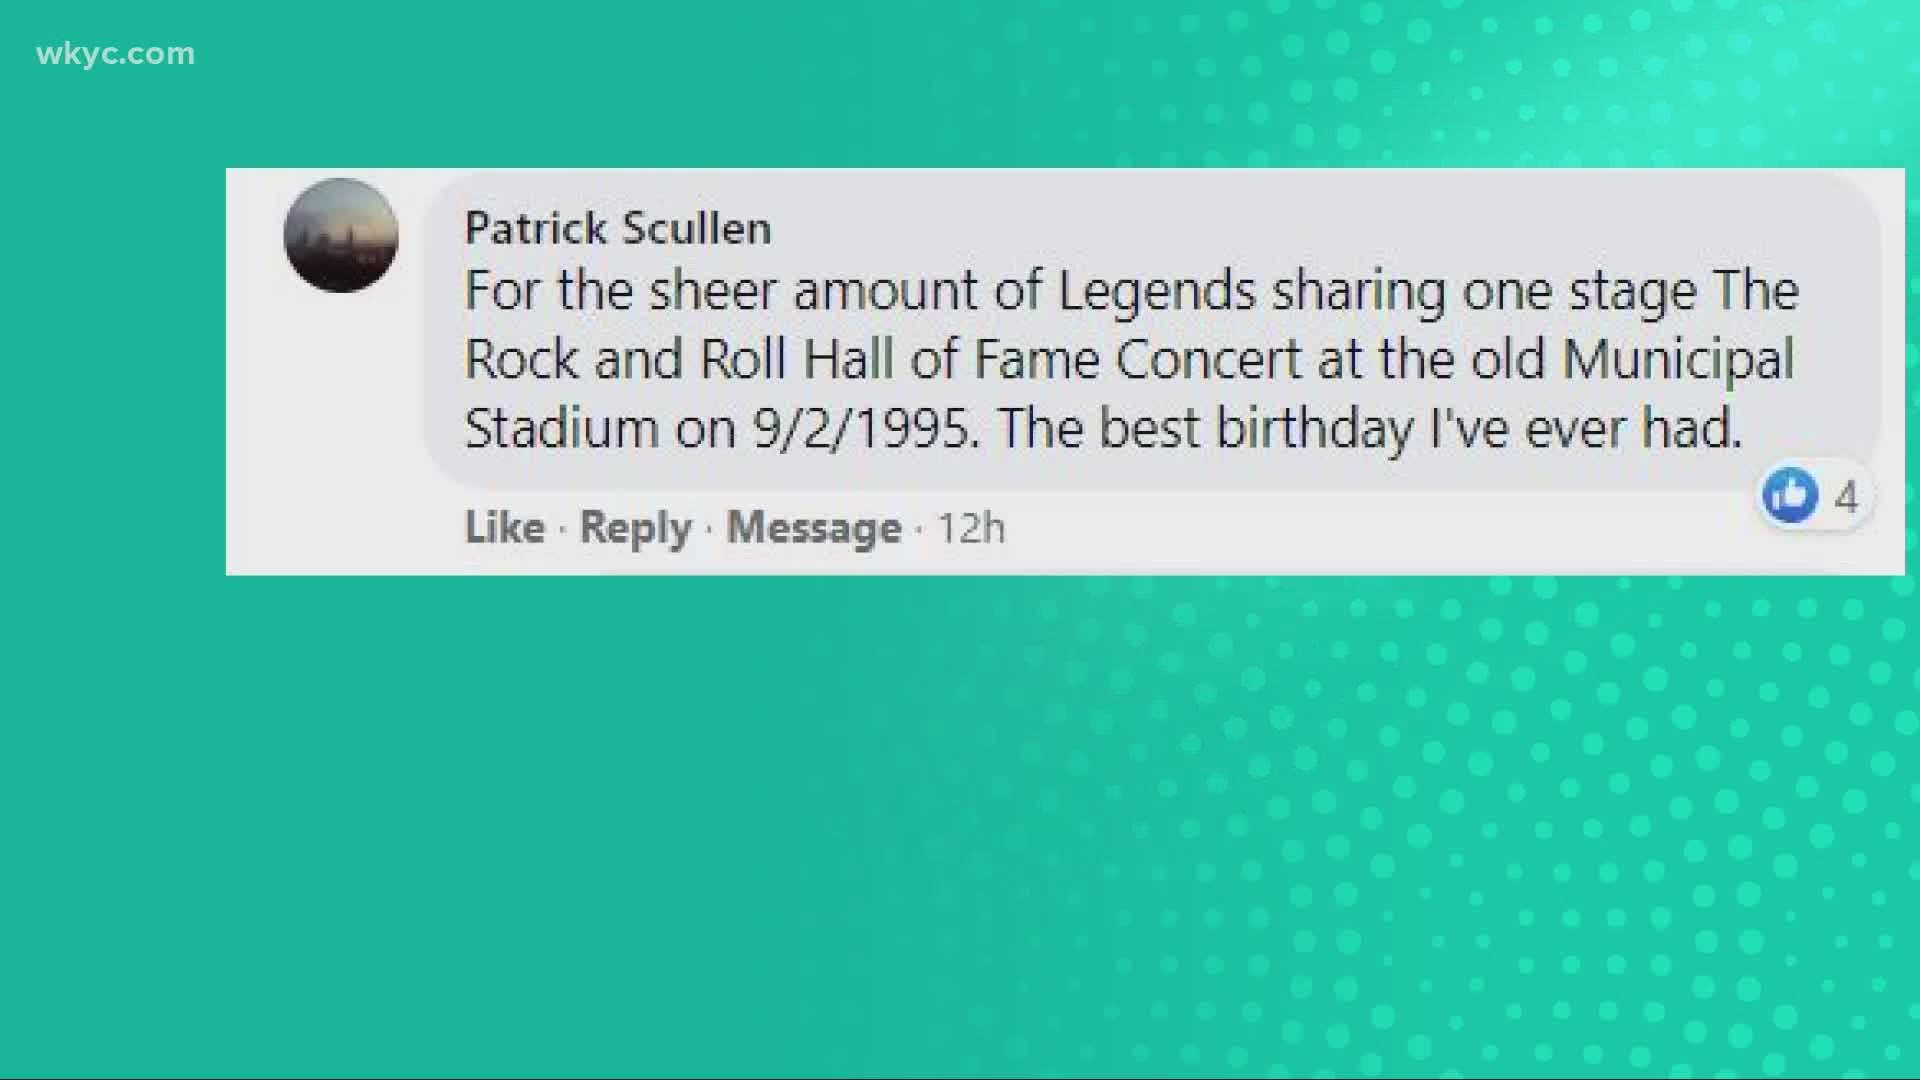 Is there one rock concert you'll never forget? Viewers share their favorite memories of the best concerts they've ever attended in Northeast Ohio.